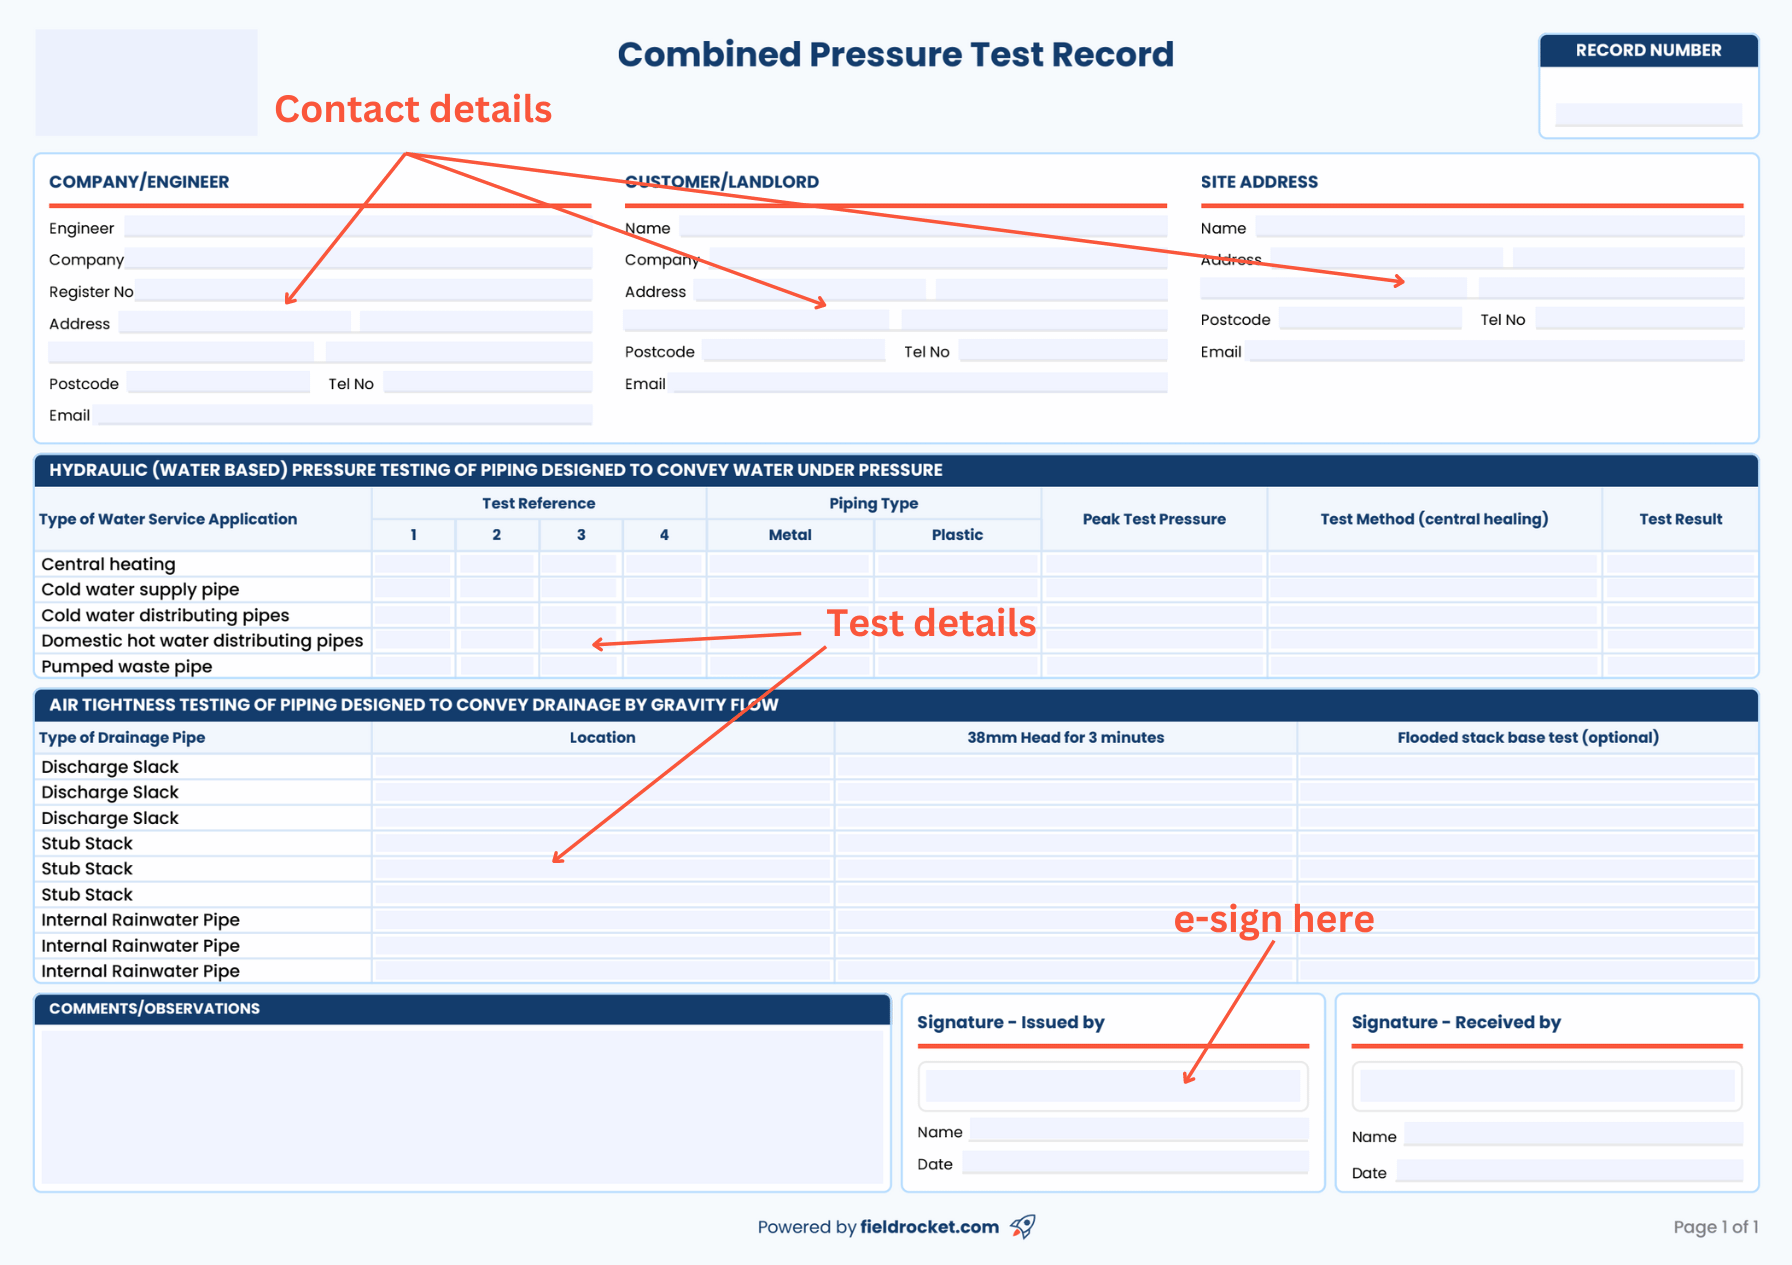 A quick guide on how to fill out a combined pressure test record